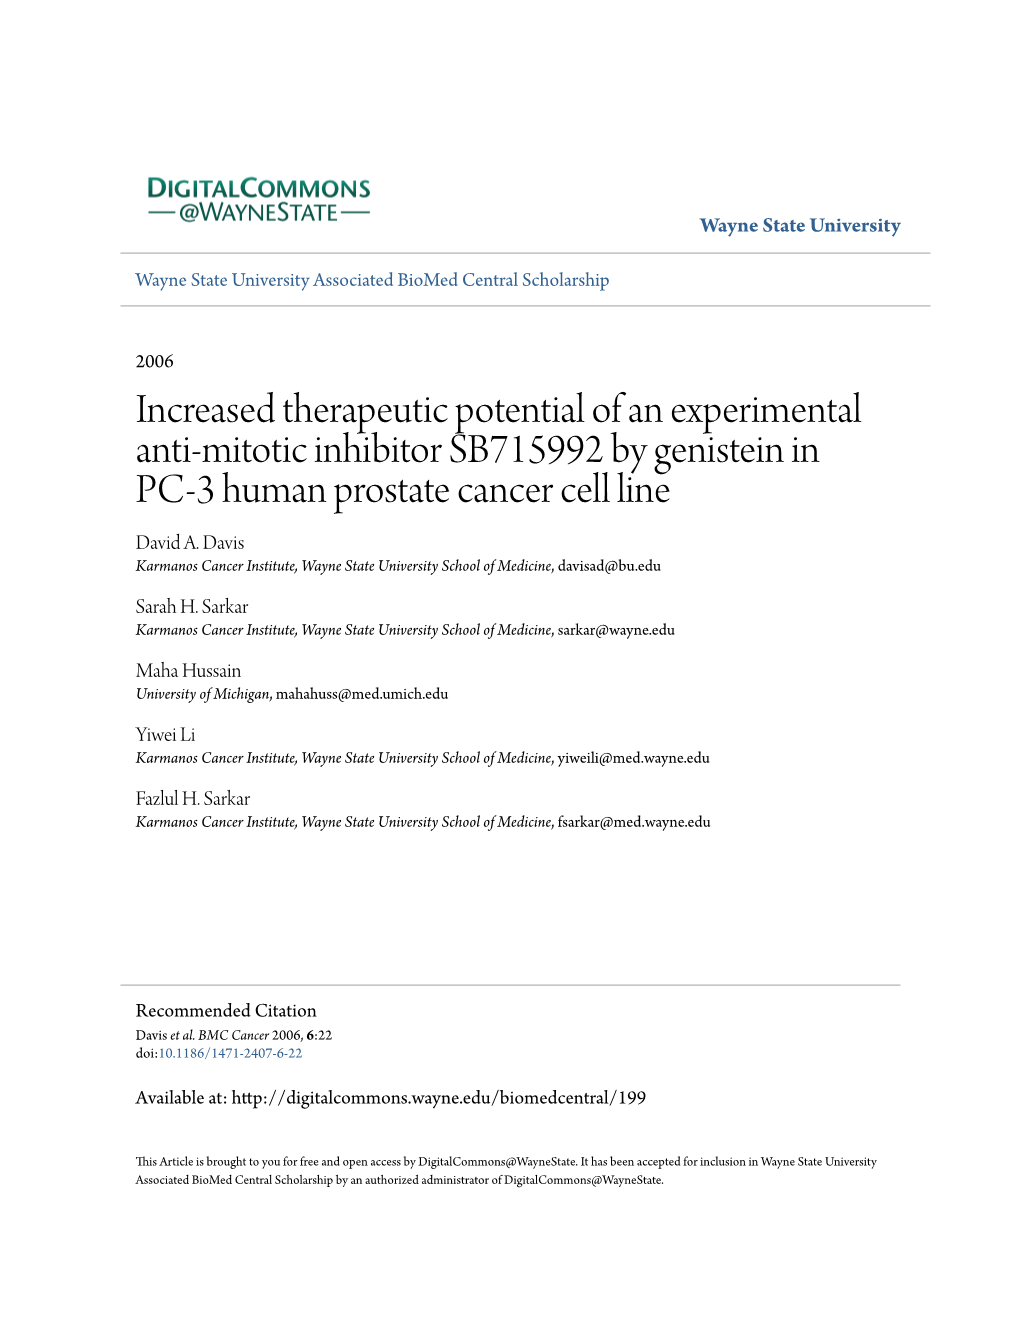 Increased Therapeutic Potential of an Experimental Anti-Mitotic Inhibitor SB715992 by Genistein in PC-3 Human Prostate Cancer Cell Line David A